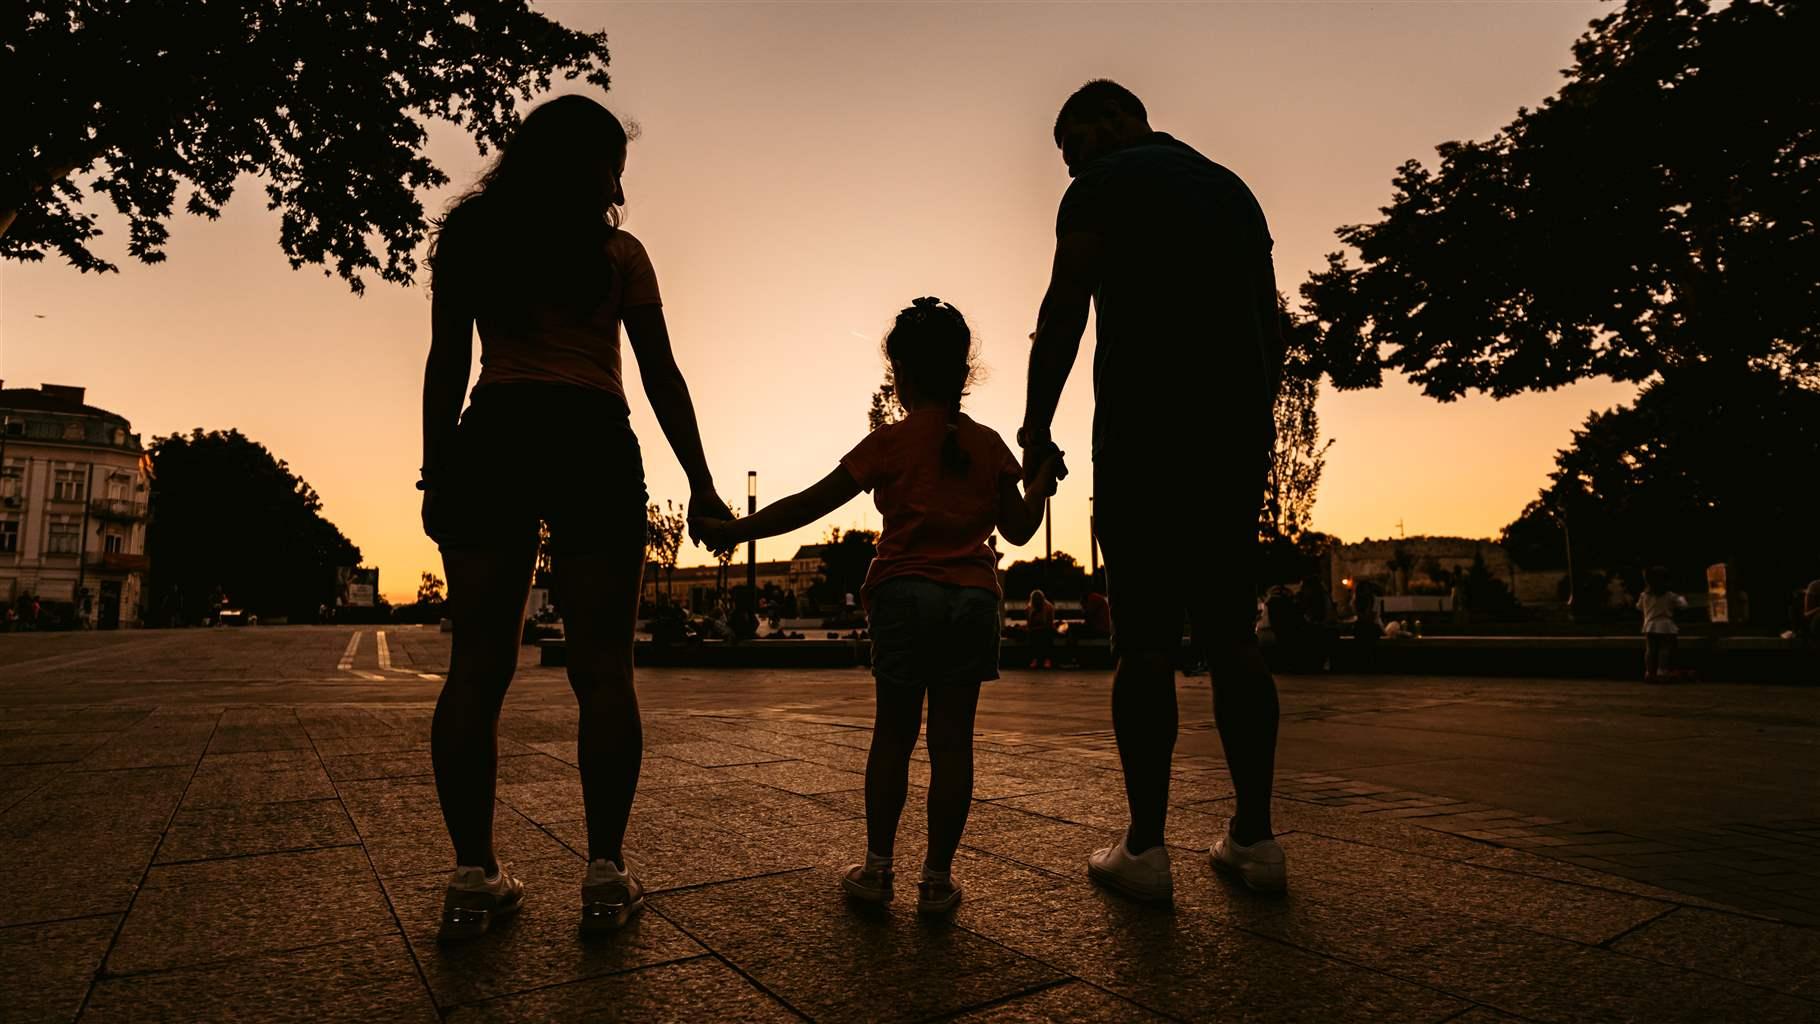 A child holds the hands of two adults, one on either side, as the three stand outside in silhouette against a setting sun.